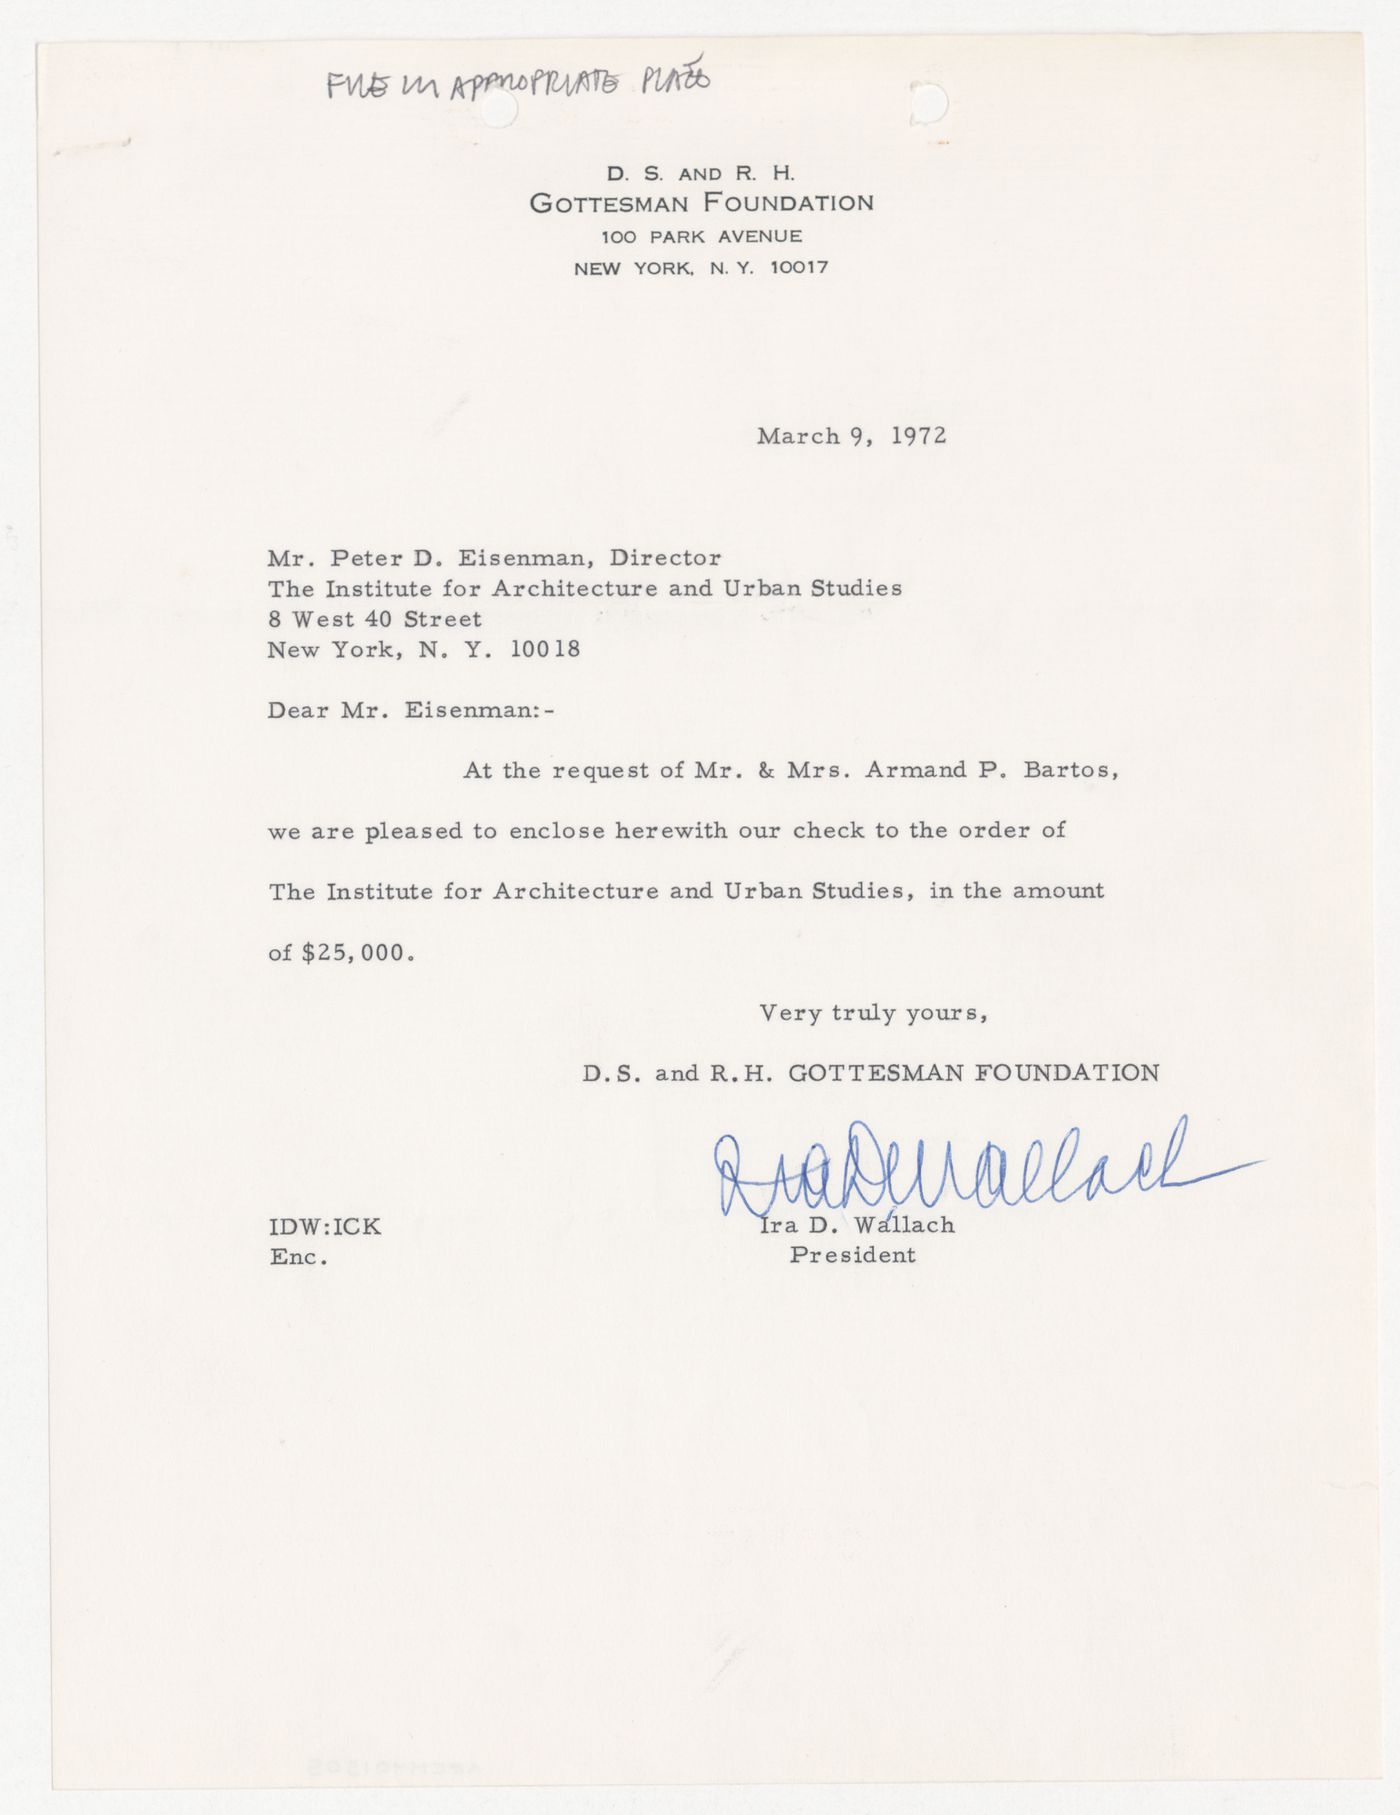 Letter from Ira D. Wallach to Peter D. Eisenman about funding from the D. S. and R. H. Gottesman Foundation